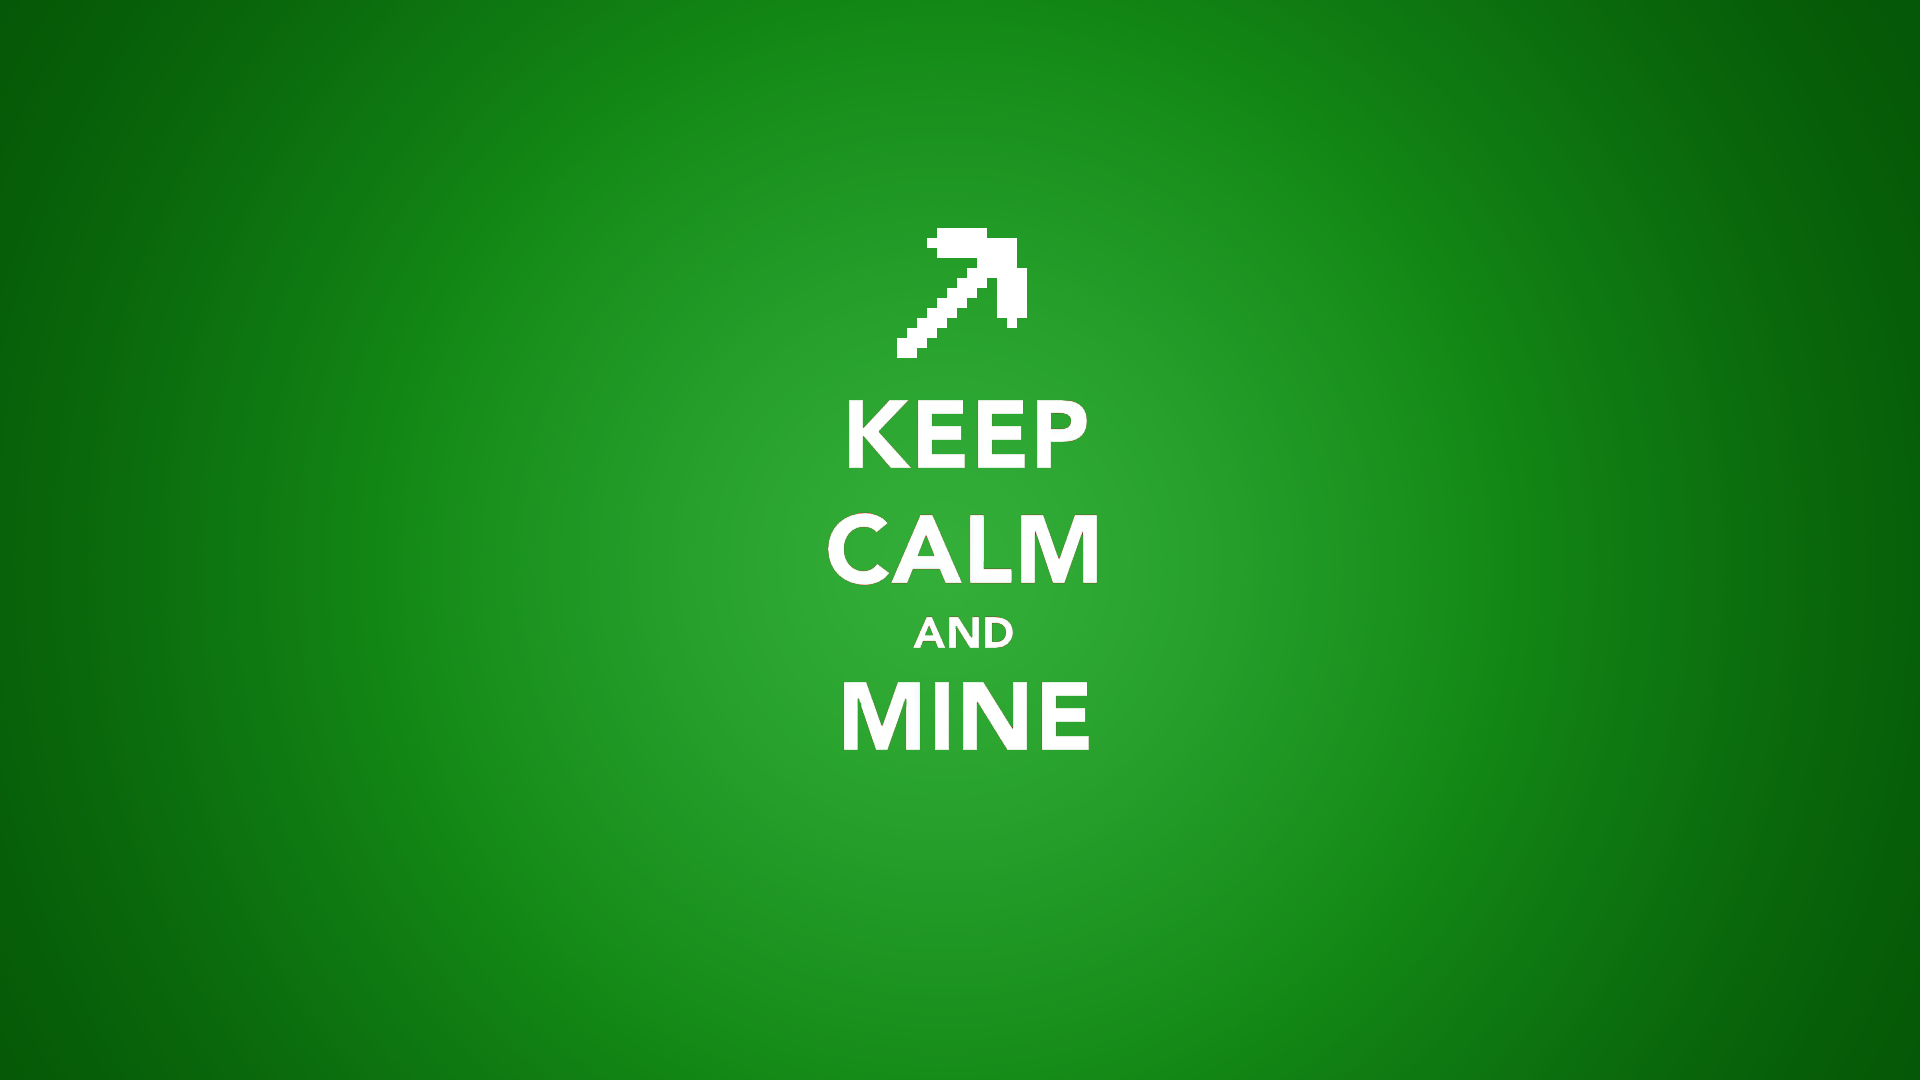 General 1920x1080 Minecraft Keep Calm and... green video games minimalism PC gaming green background simple background